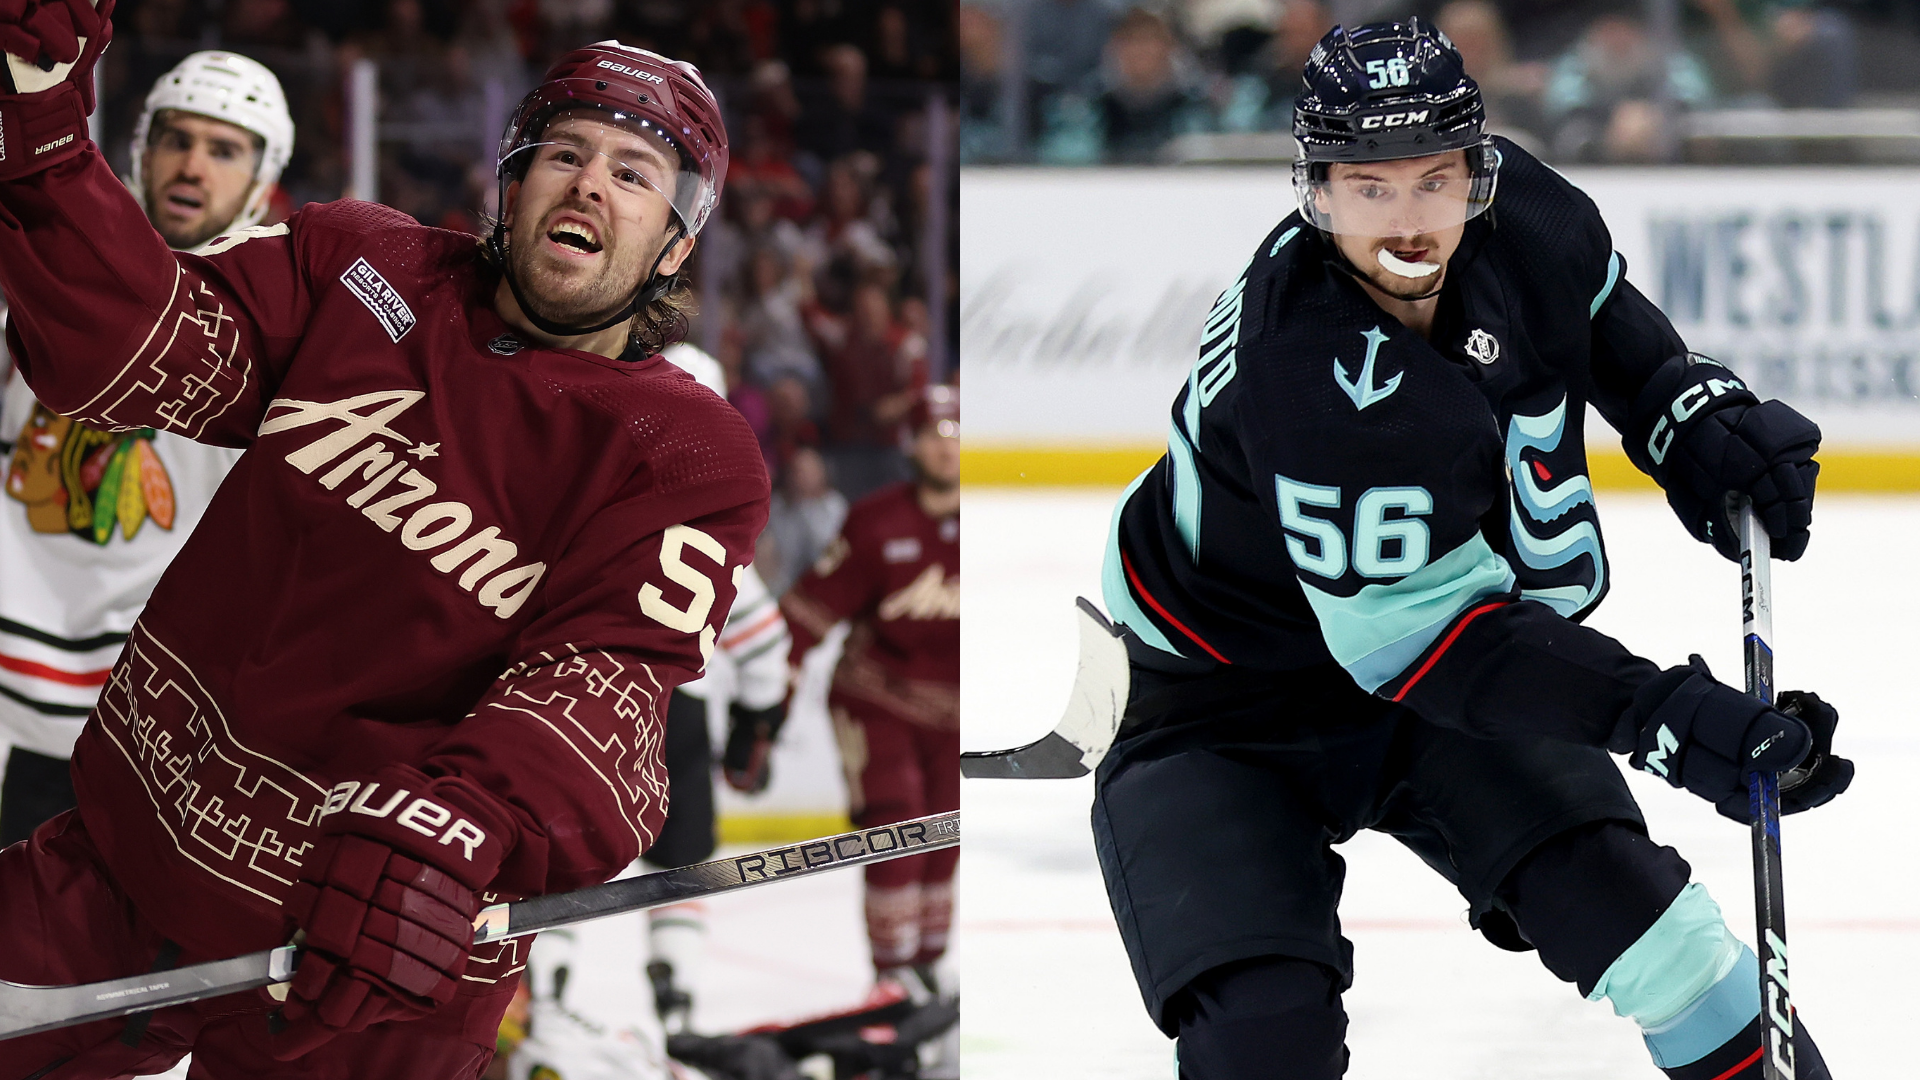  How to watch Arizona Coyotes vs Seattle Kraken NHL game: Live stream, TV channel, kickoff, stats & everything you need to know 